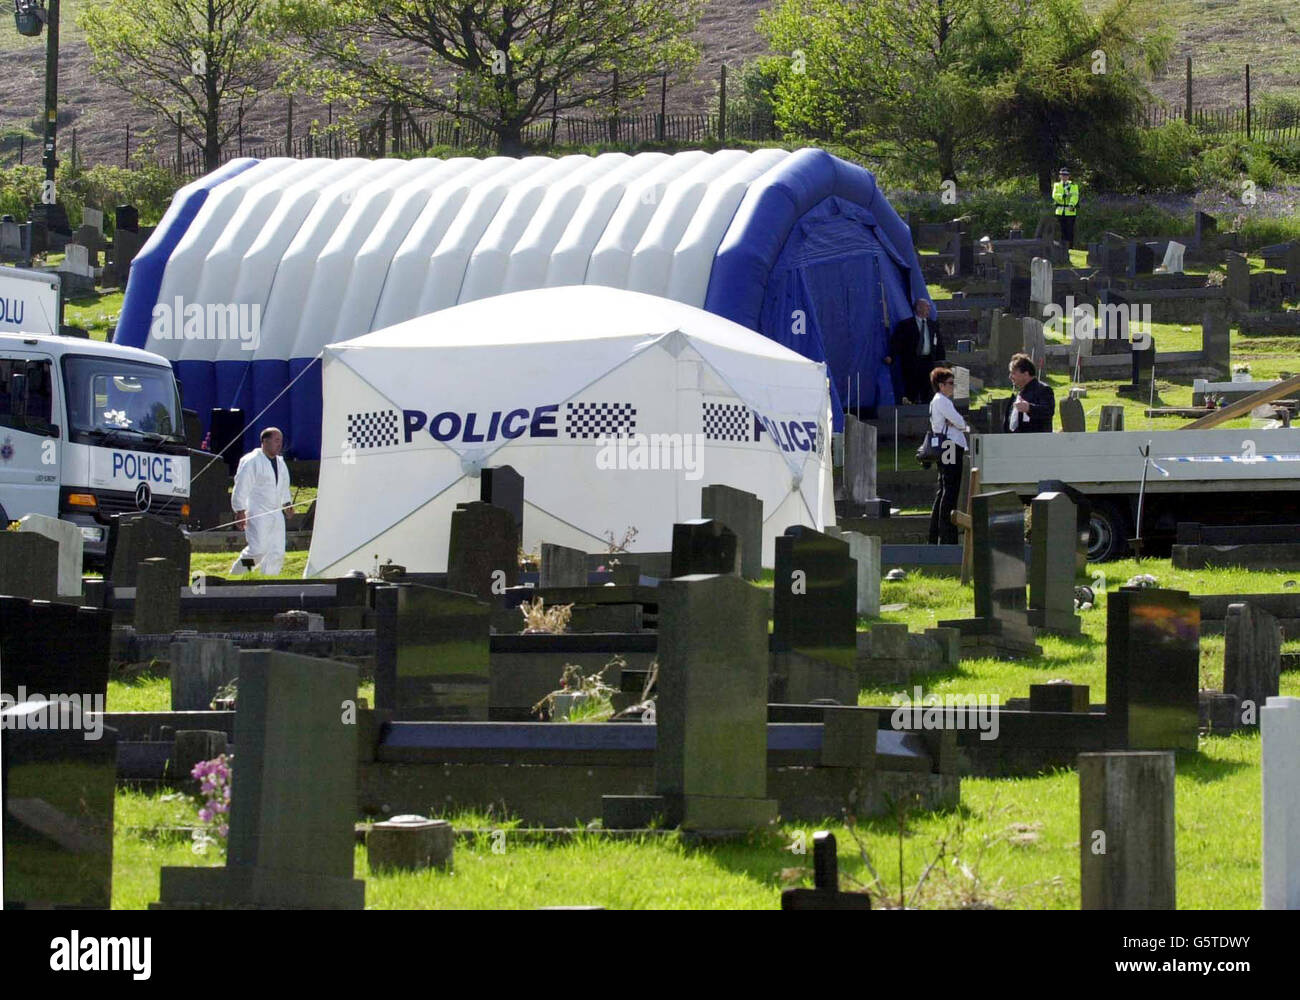 A police tent covers the grave of Joseph Kappen at Goytre Cemetery near Port Talbot, South Wales. Police are preparing to exhume the body because Kappen is a prime suspect in the investigation into the murders of three teenage girls nearly 30 years ago. Stock Photo